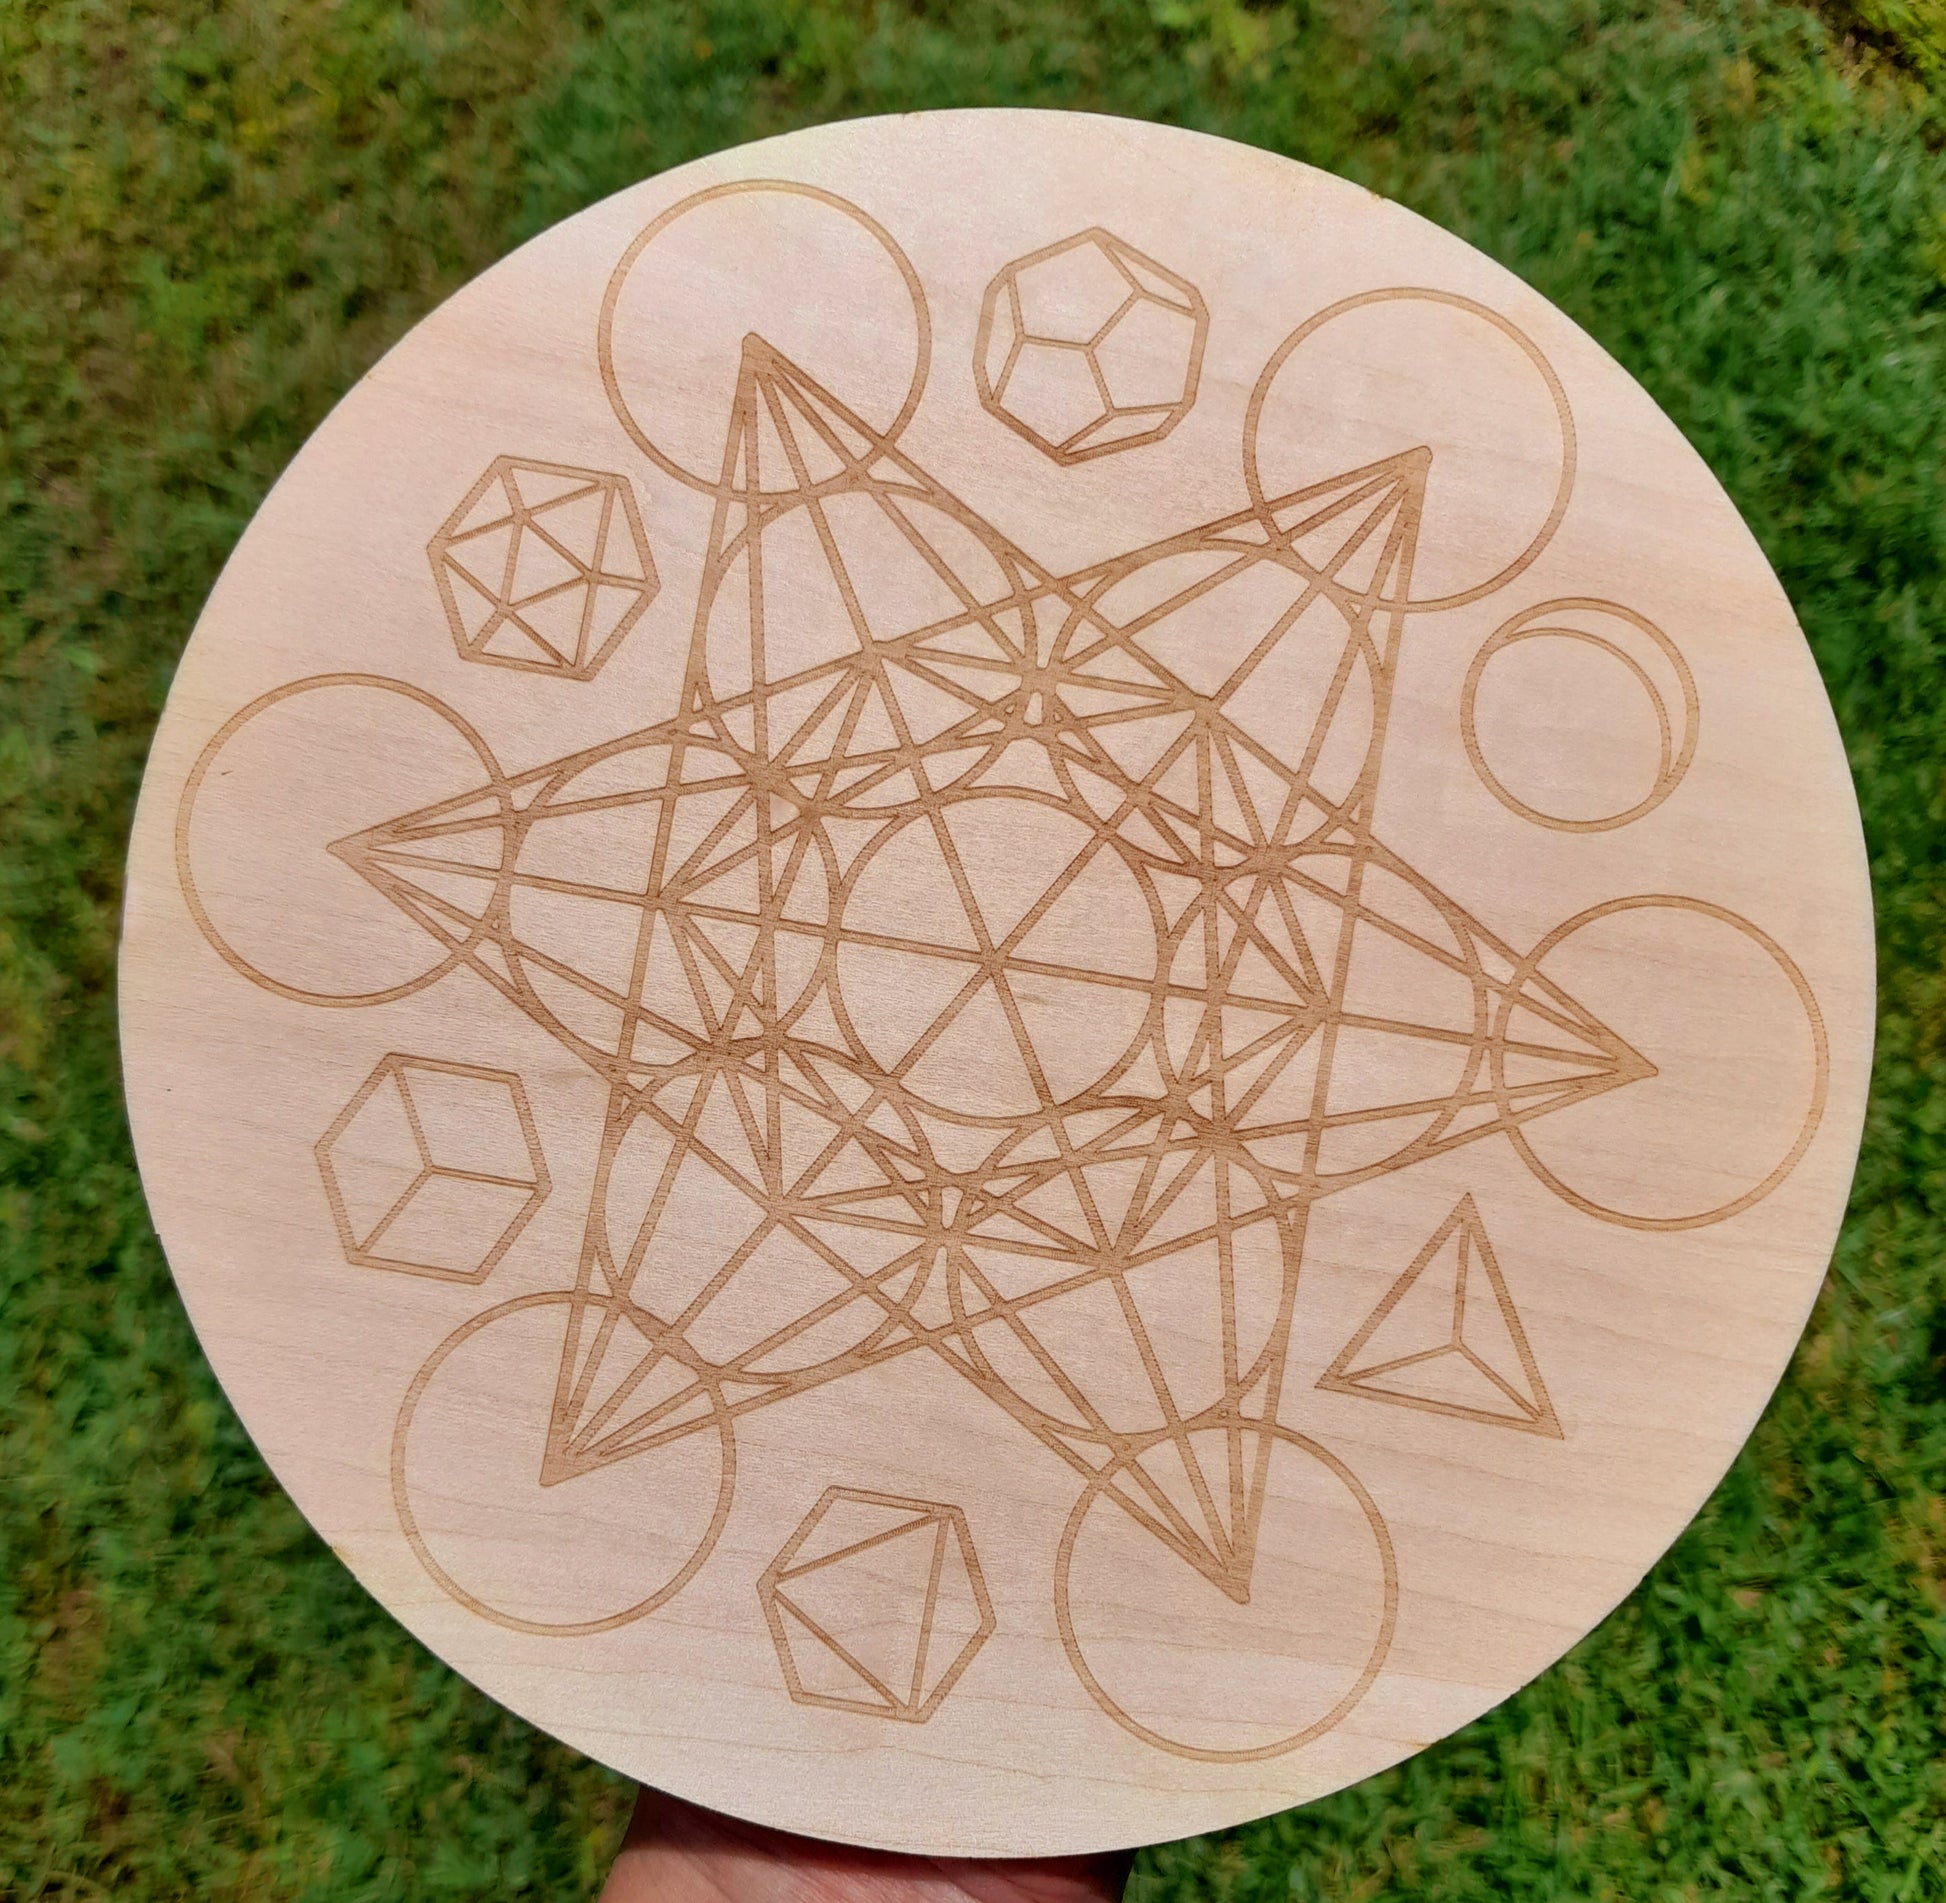 Handcrafted Wooden Crystal Grid Plate - A beautiful and versatile decorative piece, perfect for displaying your collection of stunning crystals in any home setting